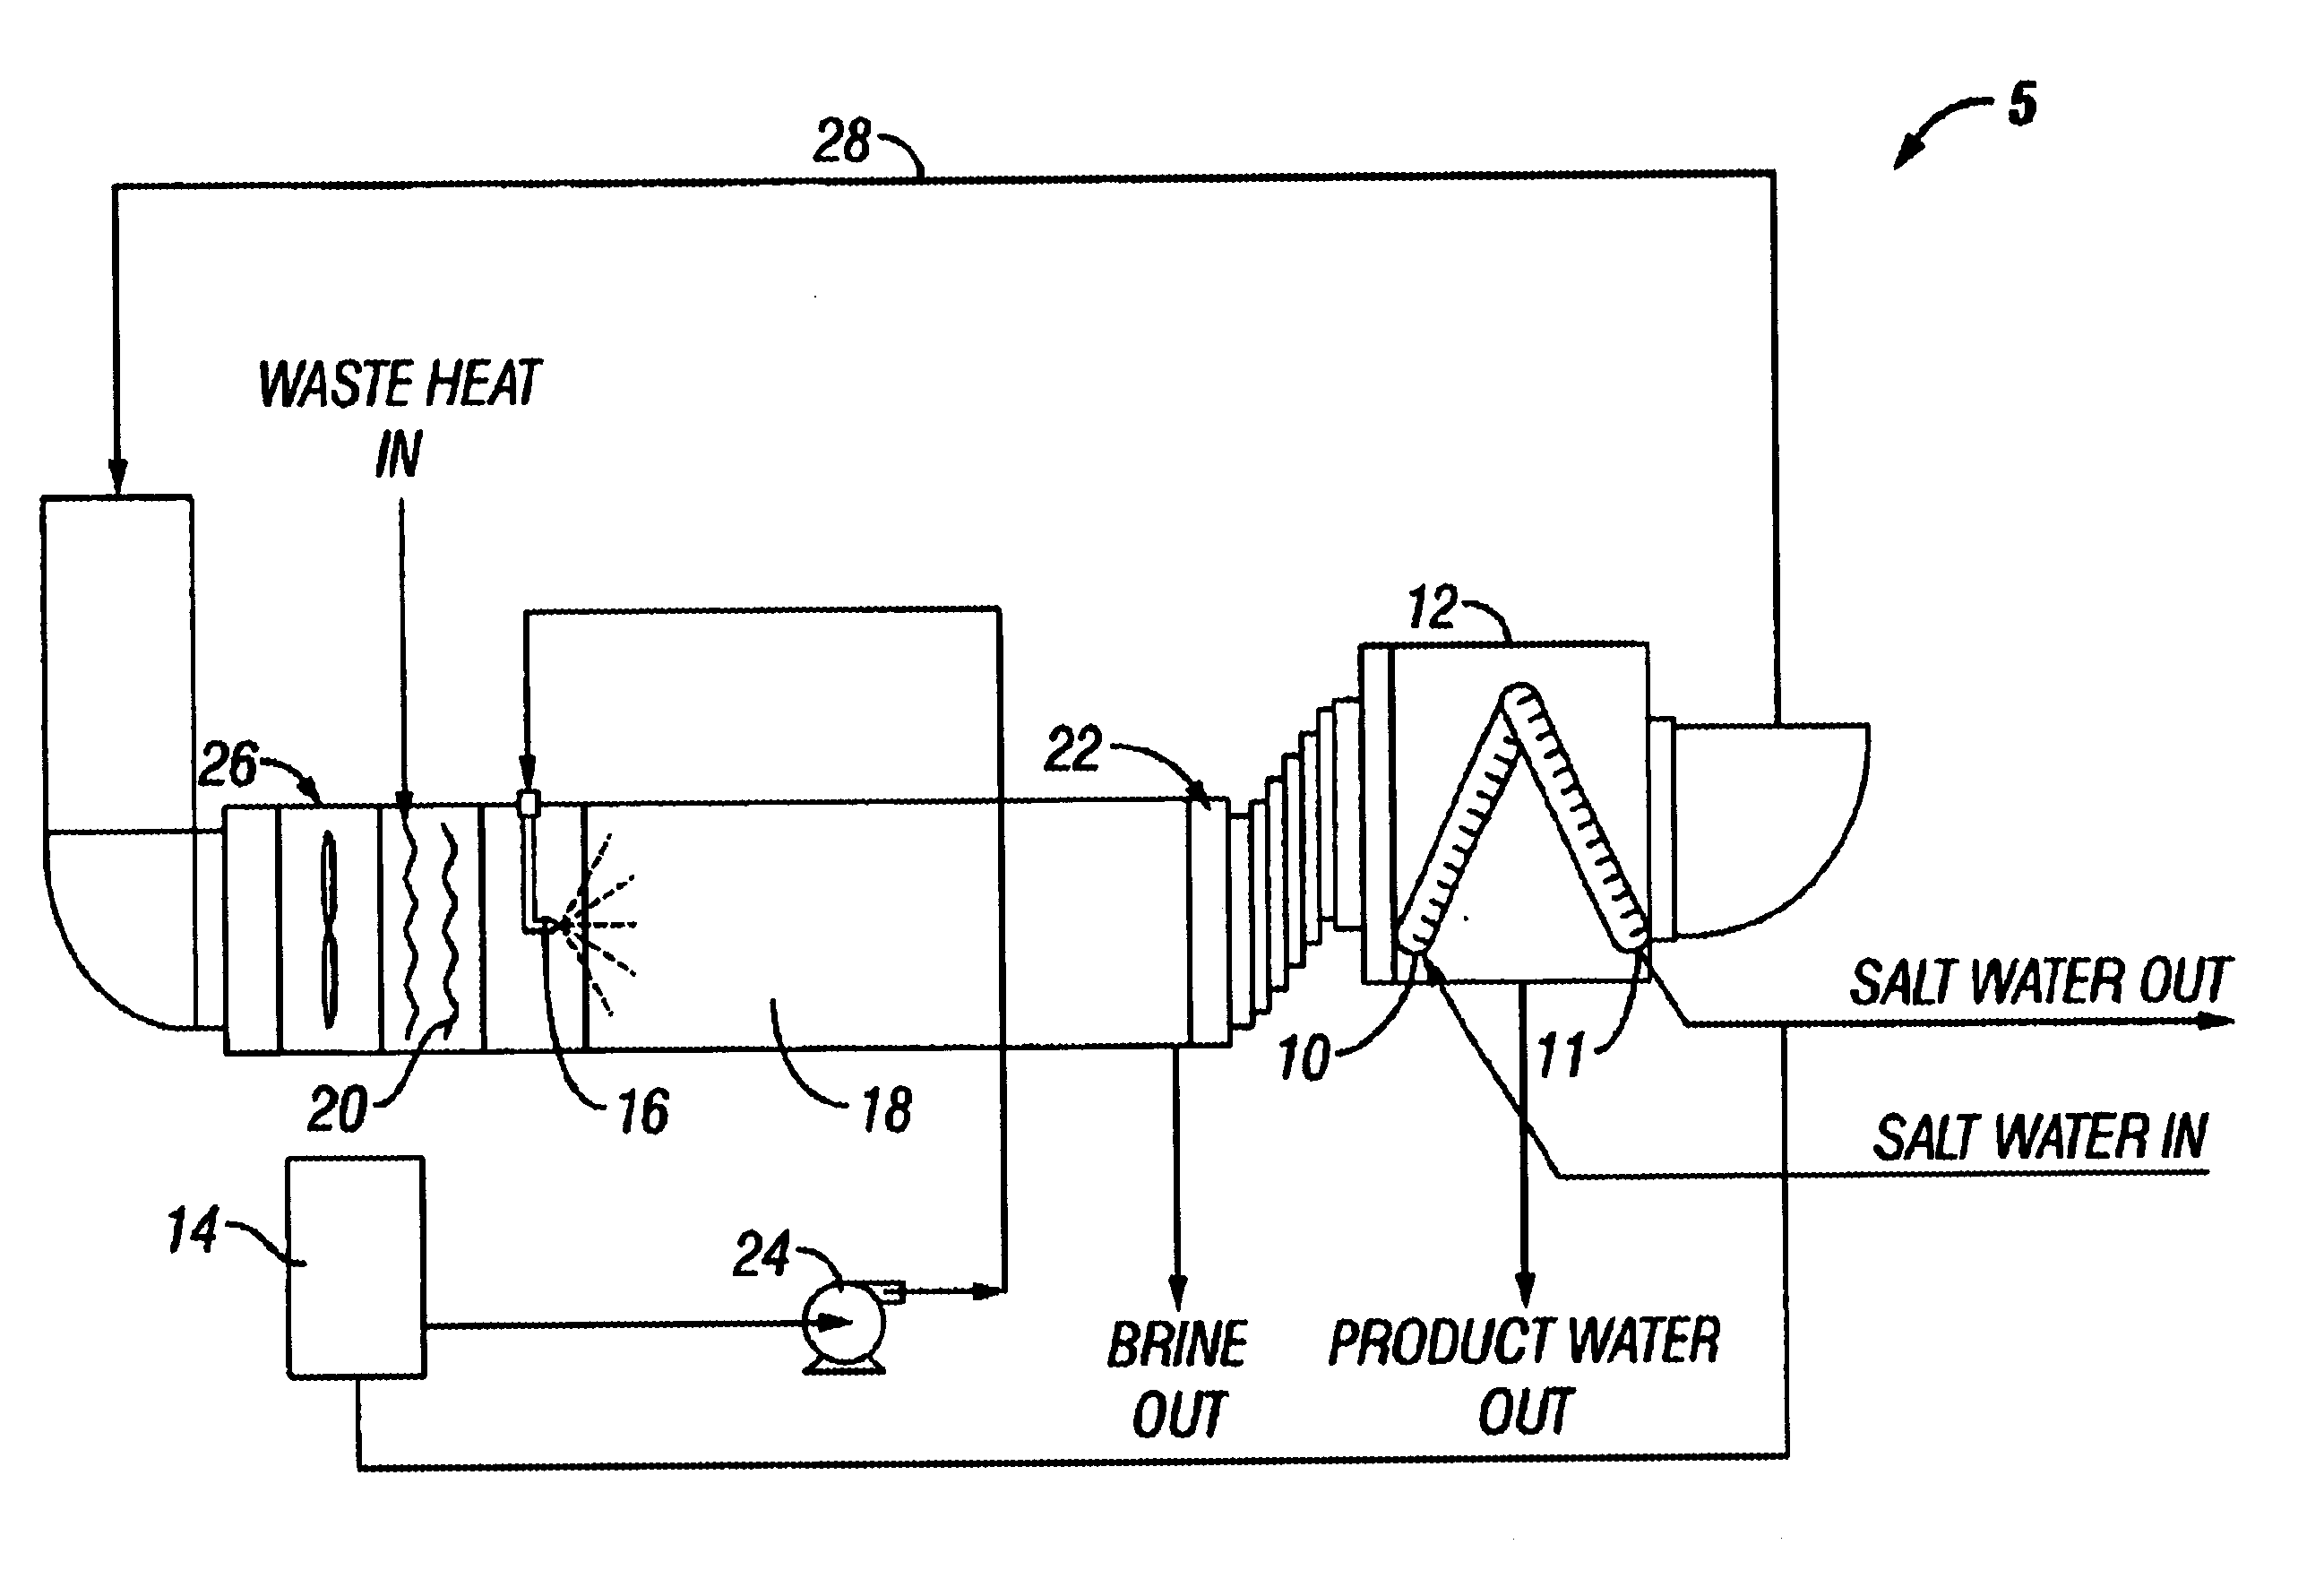 Apparatus and method for thermal desalination based on pressurized formation and evaporation of droplets